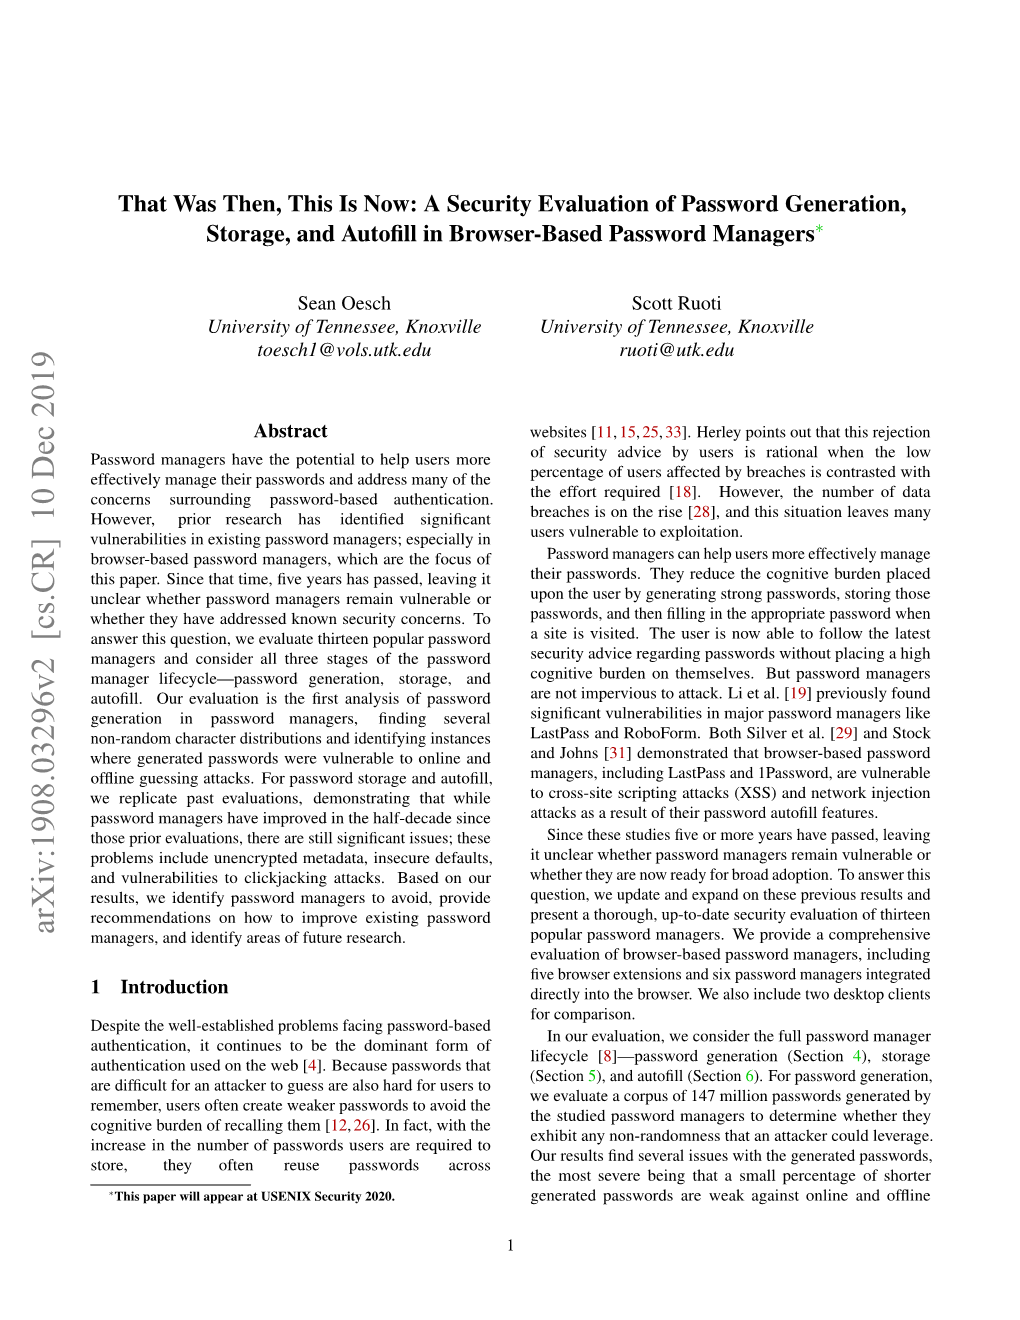 That Was Then, This Is Now: a Security Evaluation of Password Generation, Storage, and Autoﬁll in Browser-Based Password Managers∗